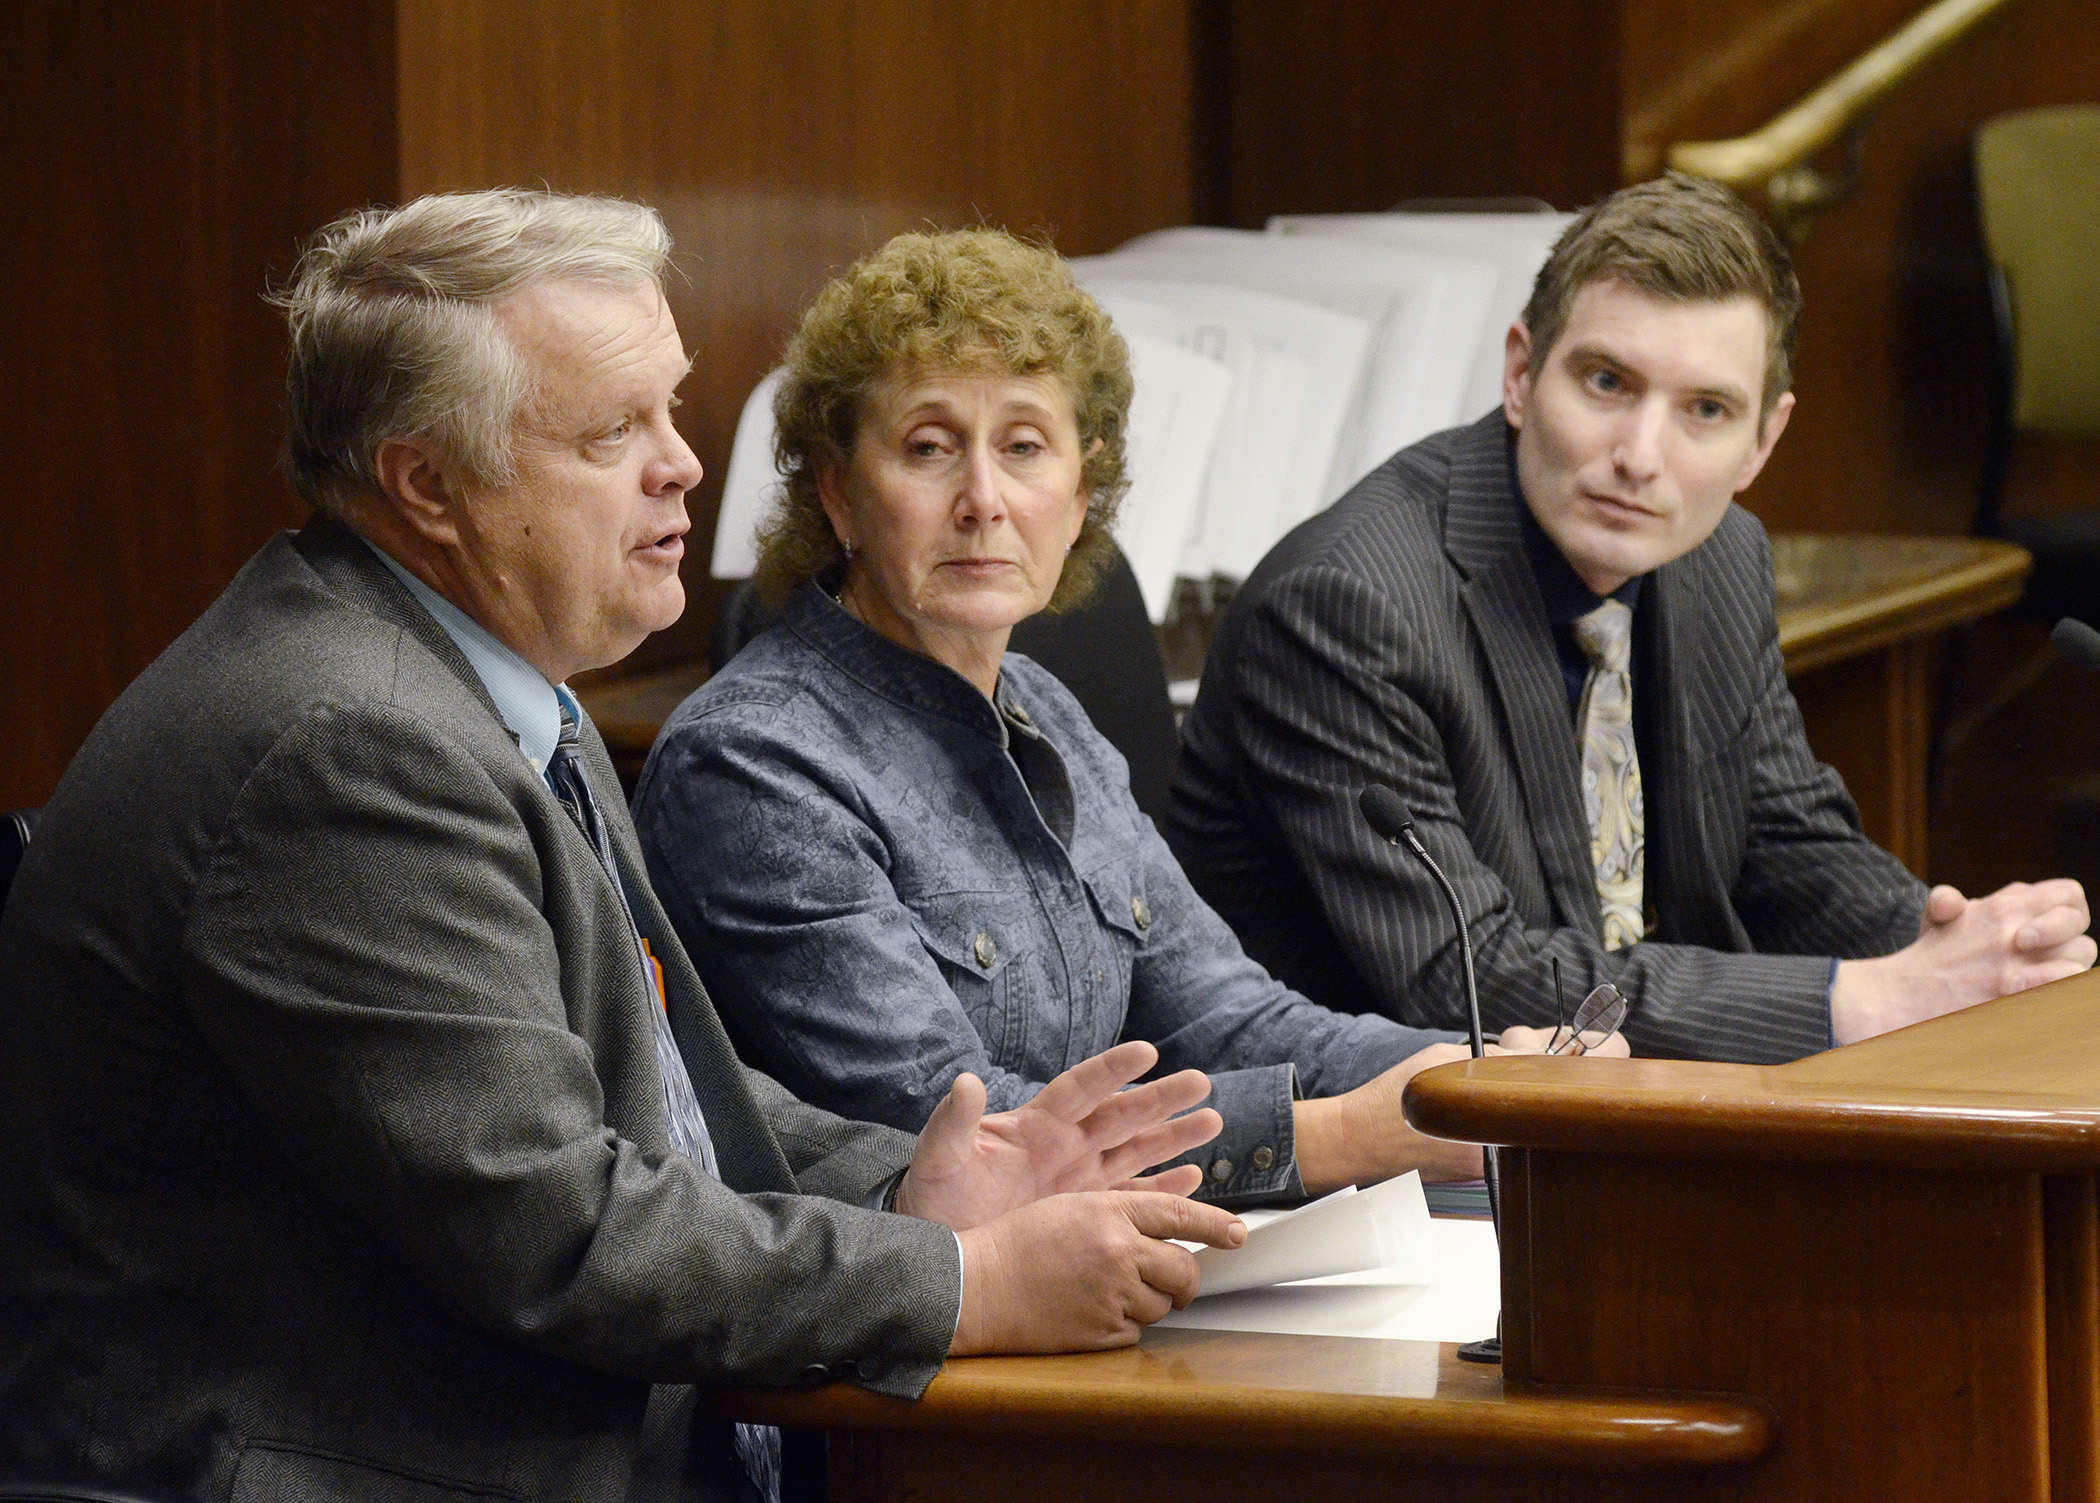 St. Louis County Commissioner Keith Nelson, left, and Arrowhead Regional Corrections Executive Director Kay Arola, center, testify for a bill sponsored by Rep. Jason Metsa, right, to establish a butcher training pilot program. Photo by Andrew VonBank